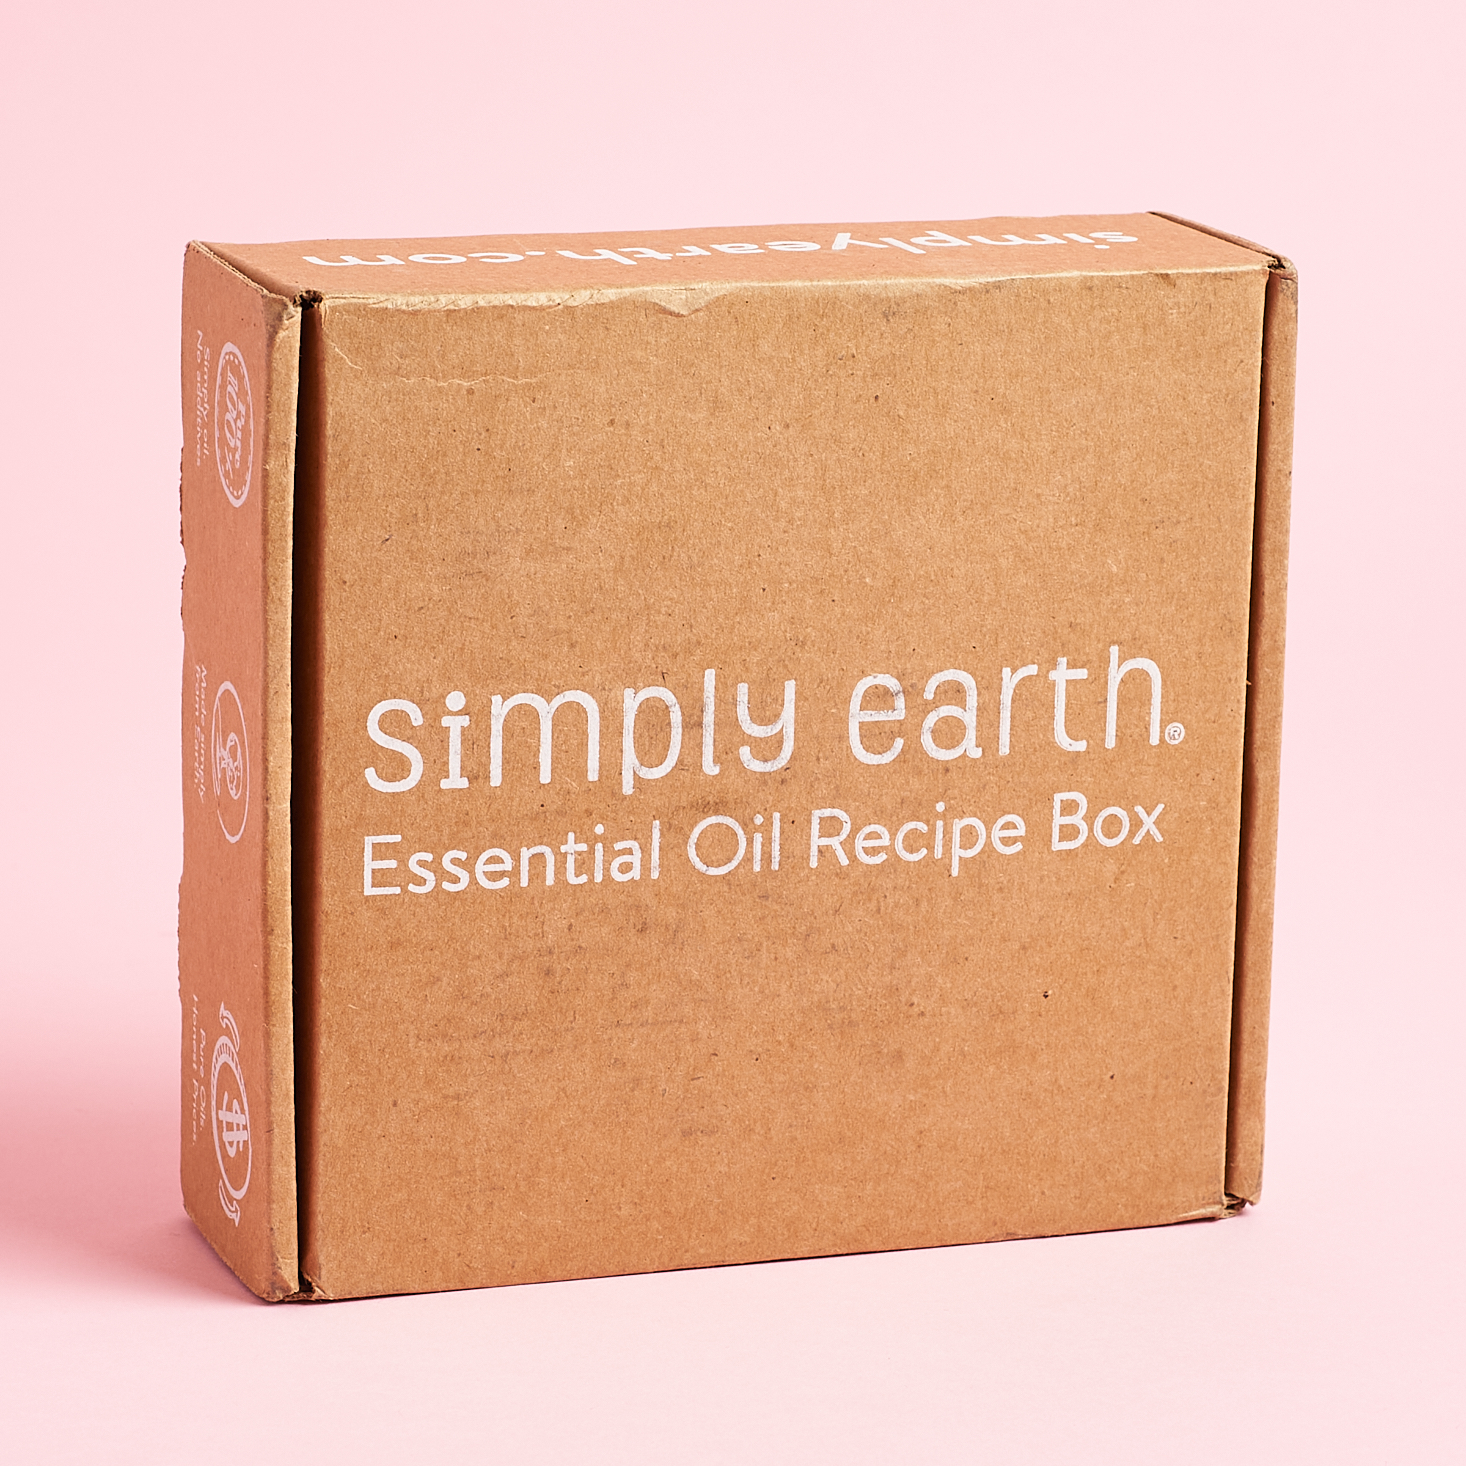 Simply Earth Essential Oil Recipe Box Review + Coupon – January 2020